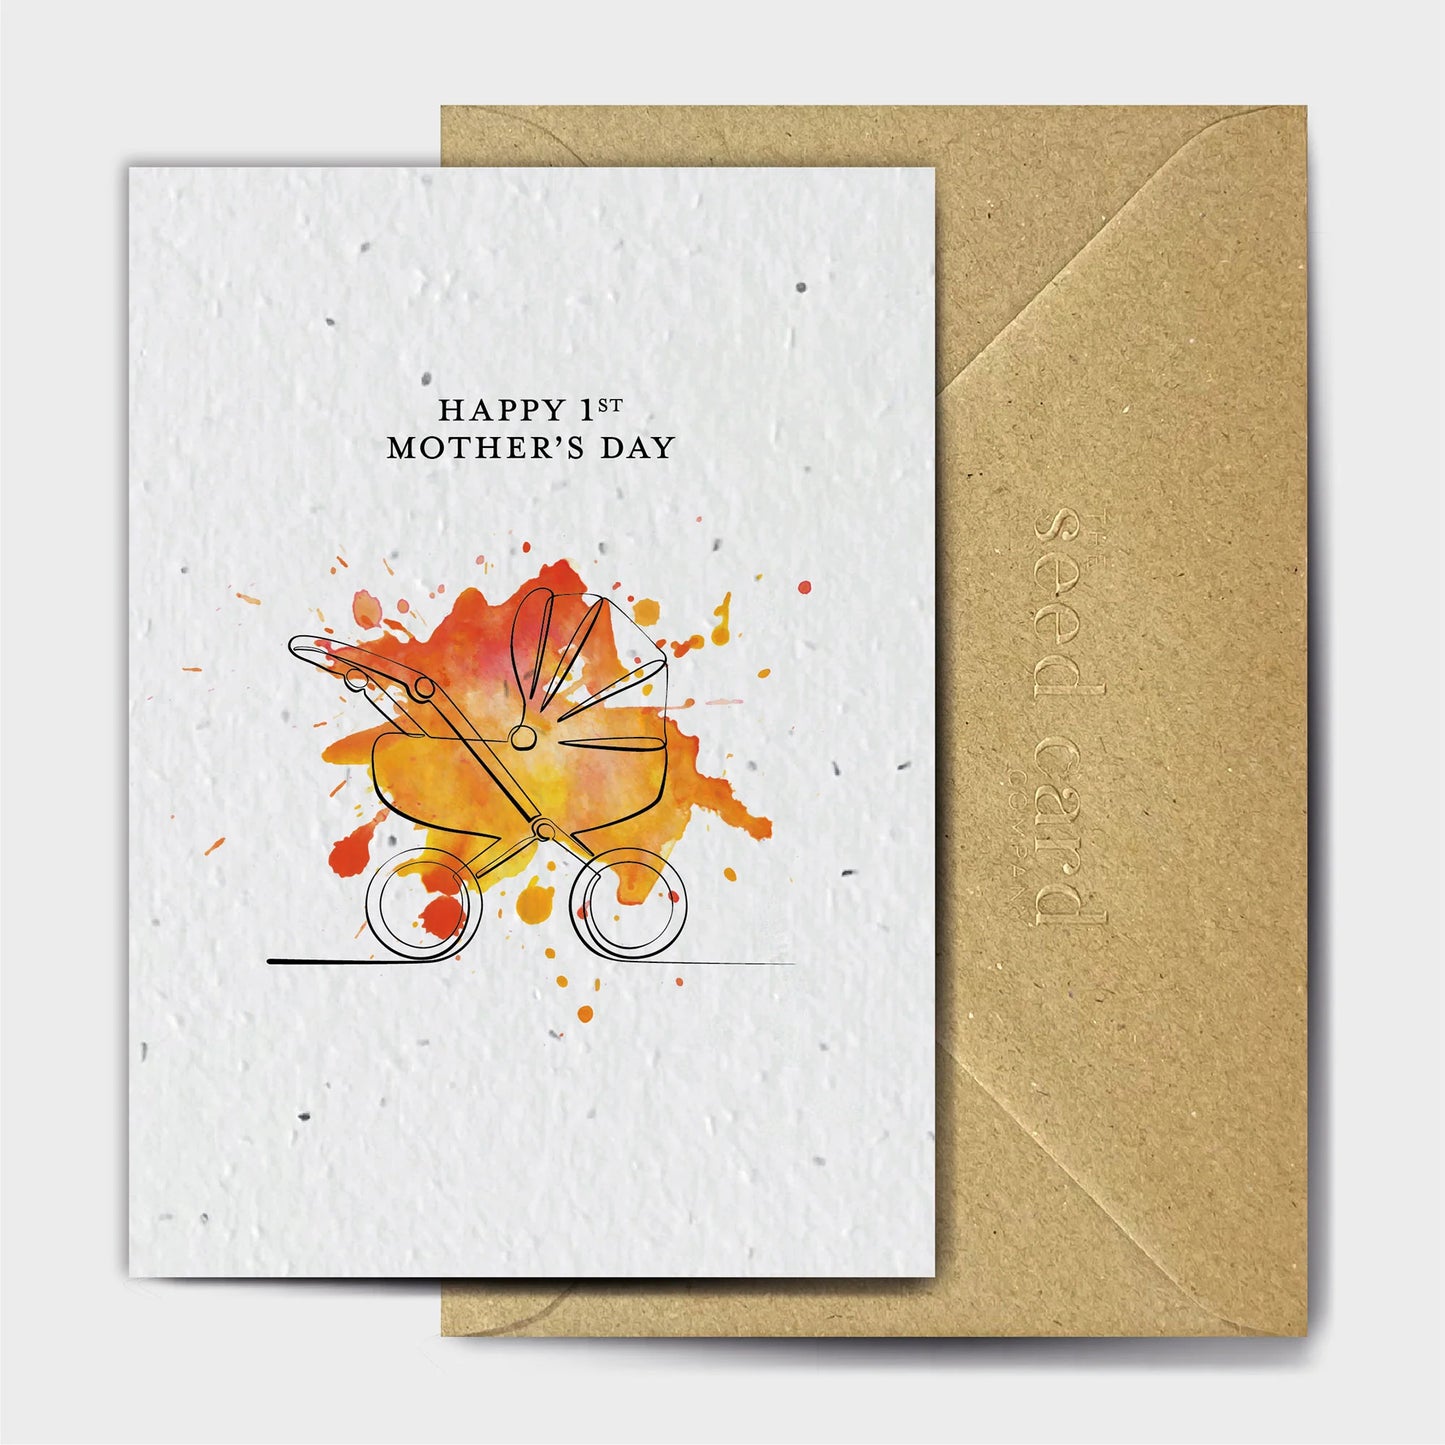 Happy 1st Mothers Day - Plantable Seed Card